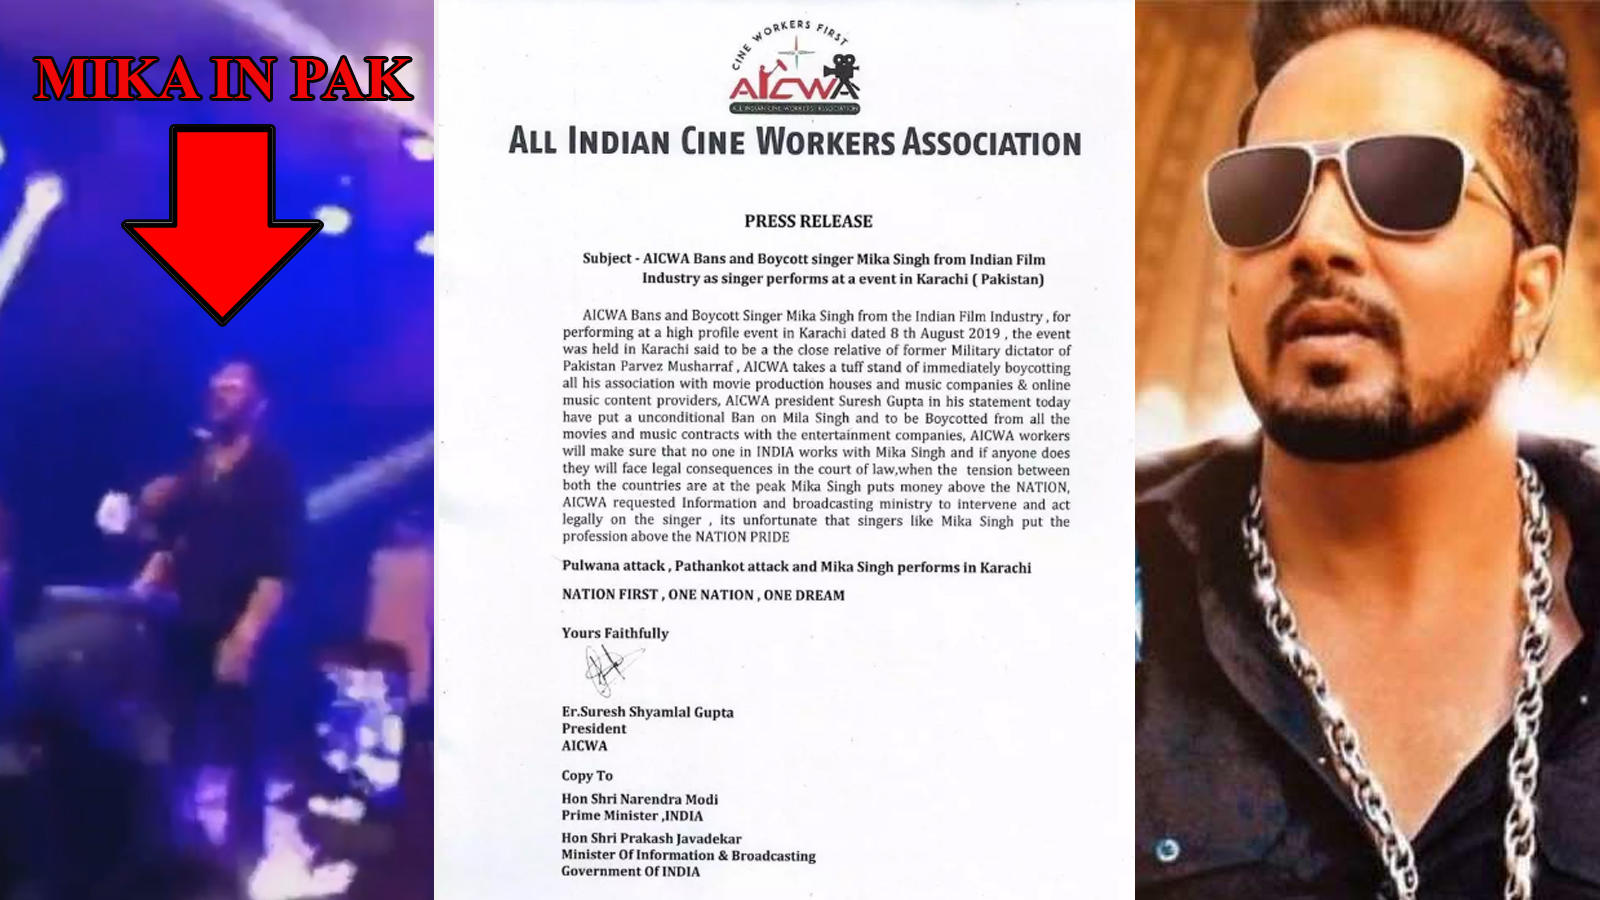 Following his performance in Pakistan for Pervez Musharraf's relative,  Bollywood singer Mika Singh faces ban by All India Cine Workers Association  | Hindi Movie News - Bollywood - Times of India